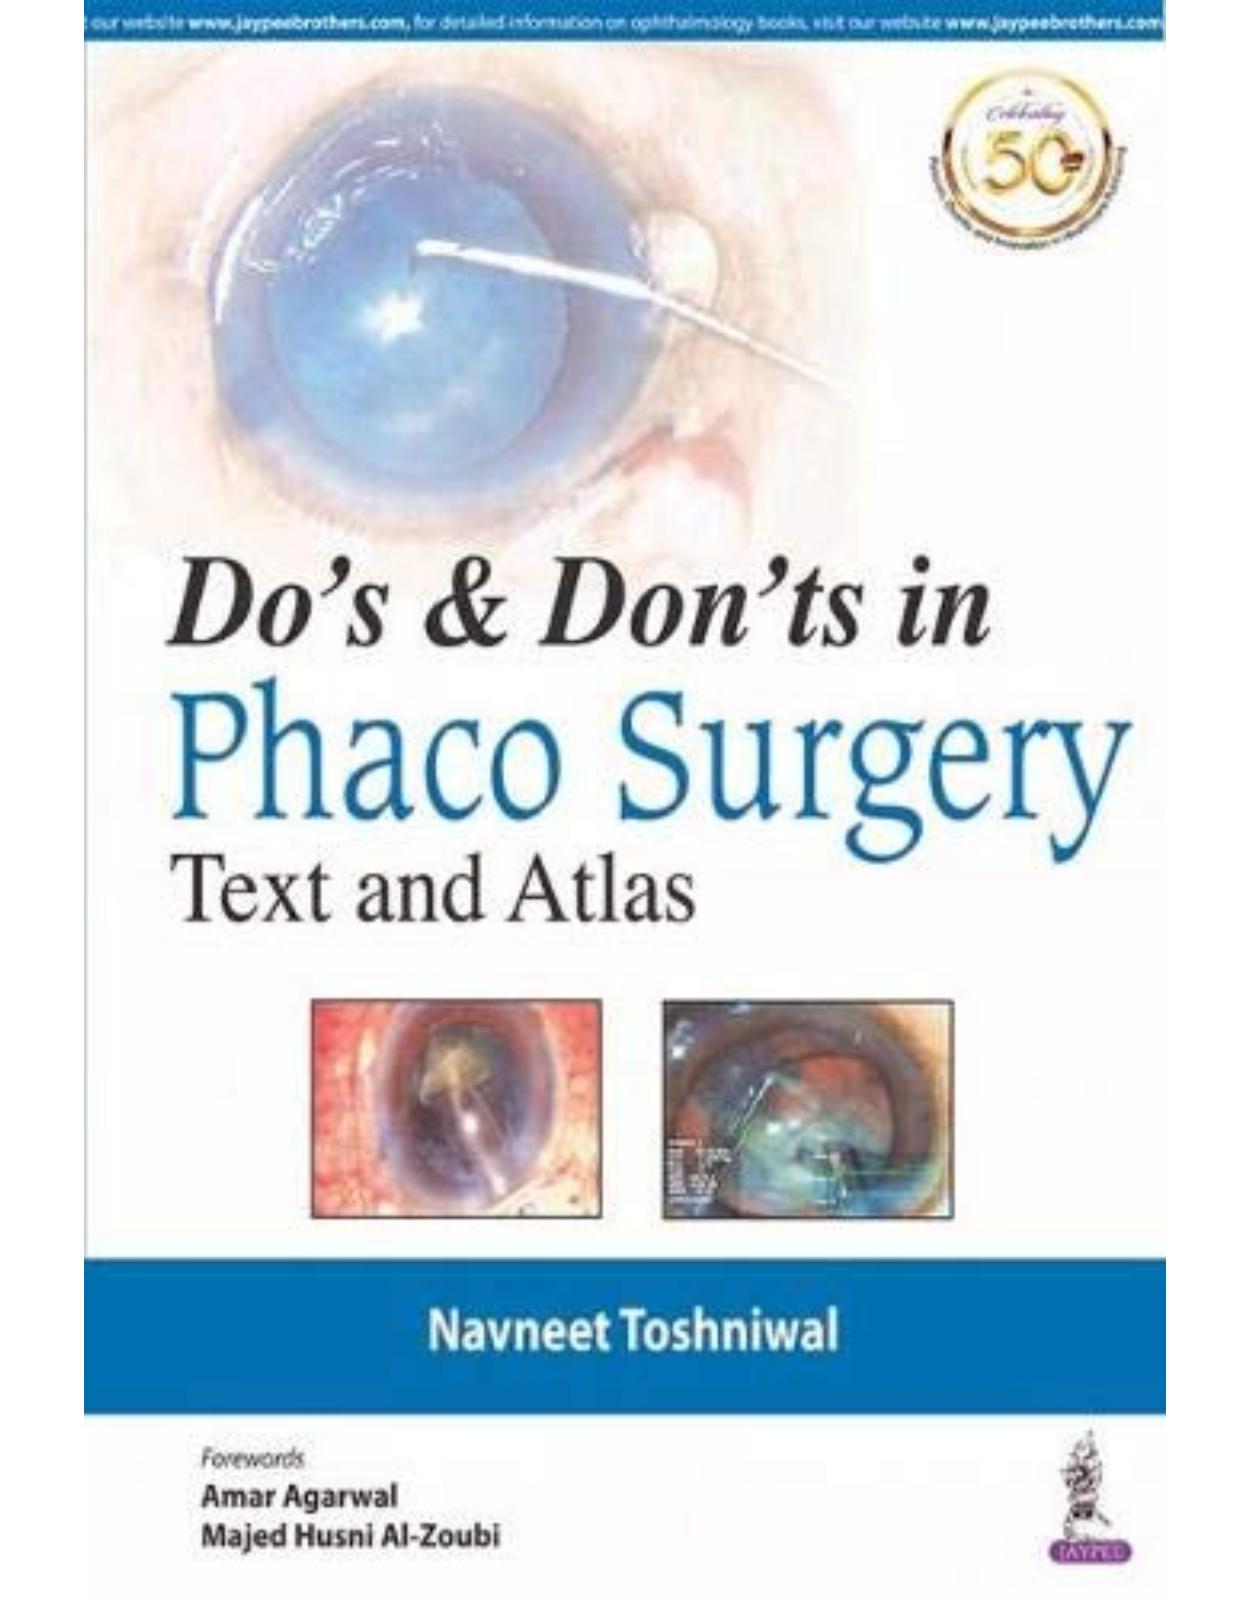 Do’s & Dont’s in Phaco Surgery